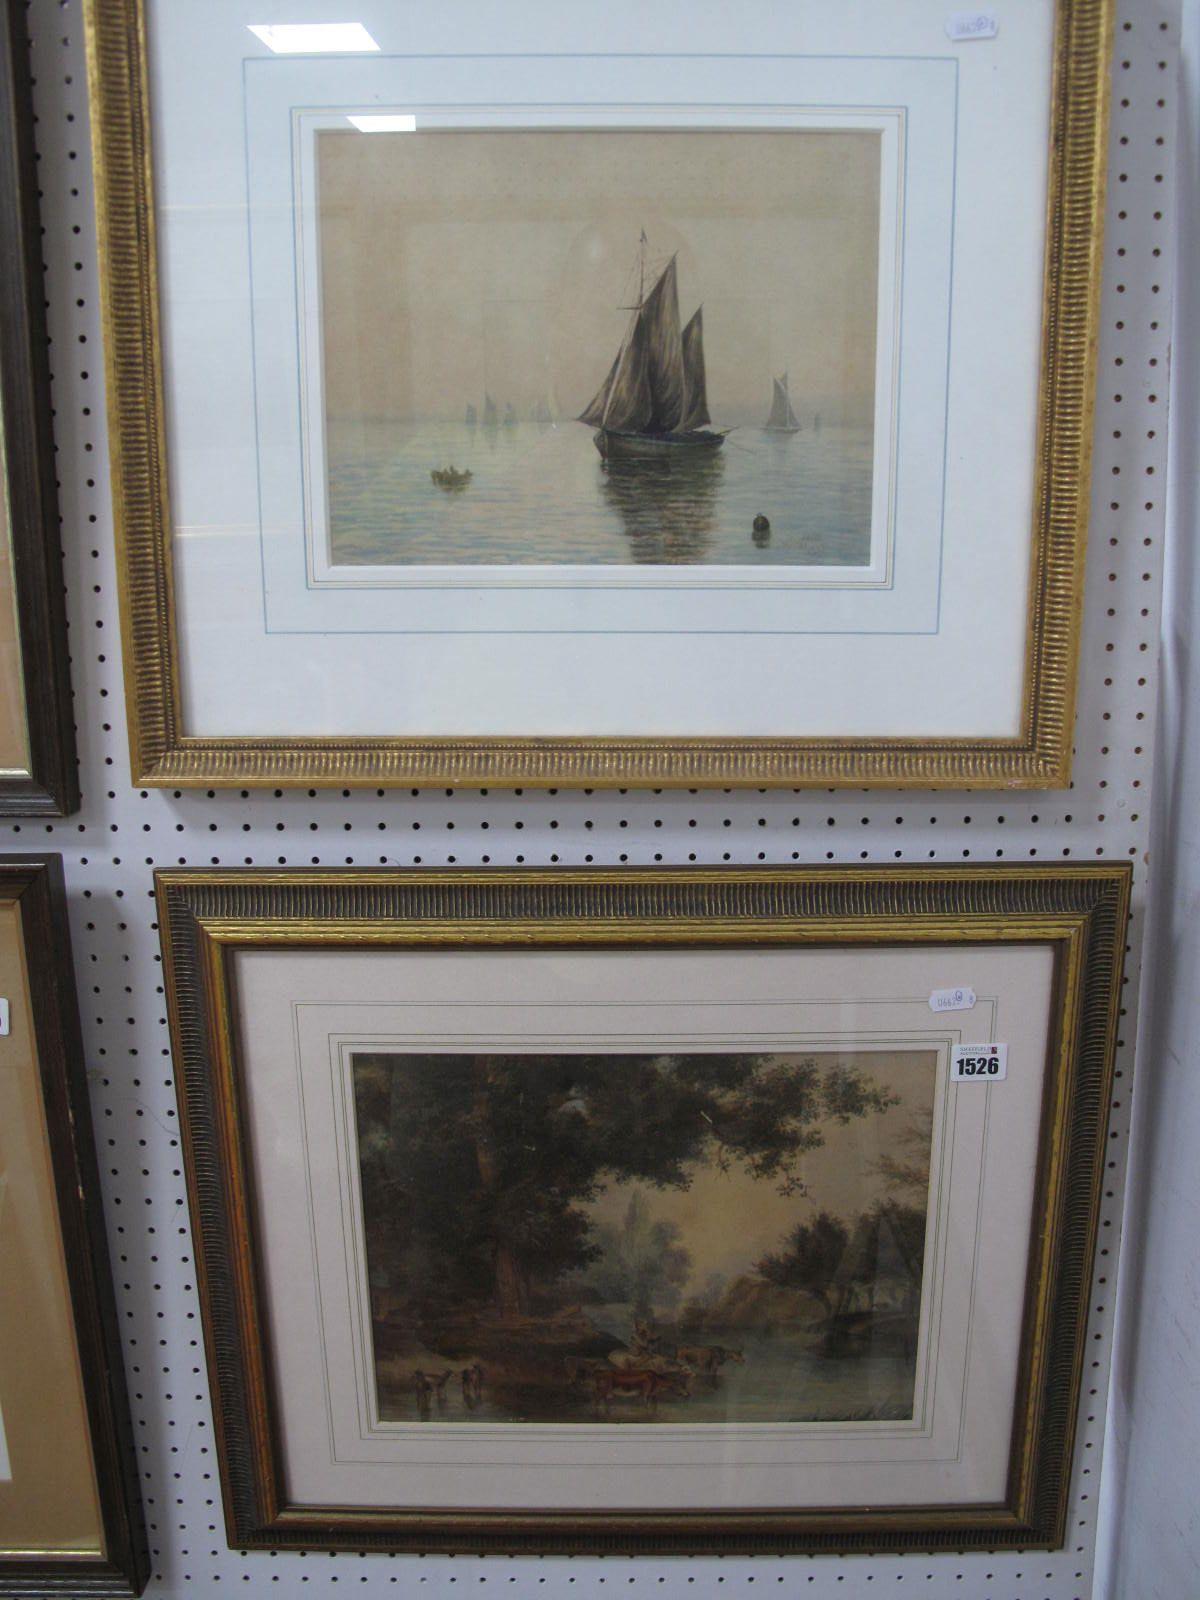 W.J. Bennett, Shipping in Tranquil Waters, watercolour, signed and dated 1929, 21.5 x 28cm,